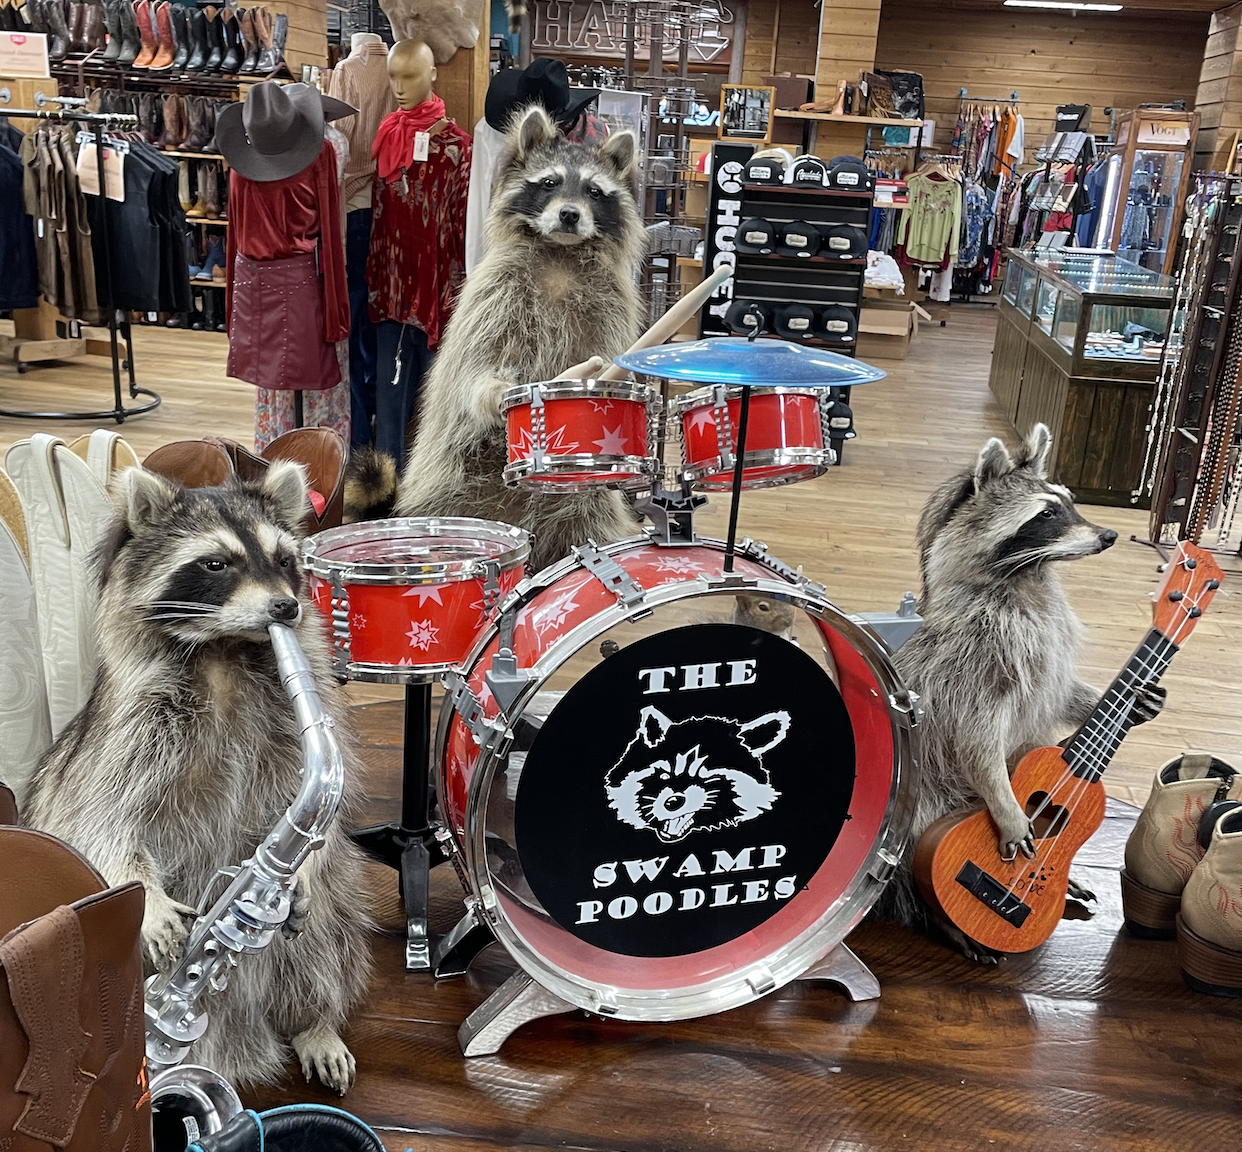 Raccoon band featured at Allen's Boots in downtown Austin, Texas.